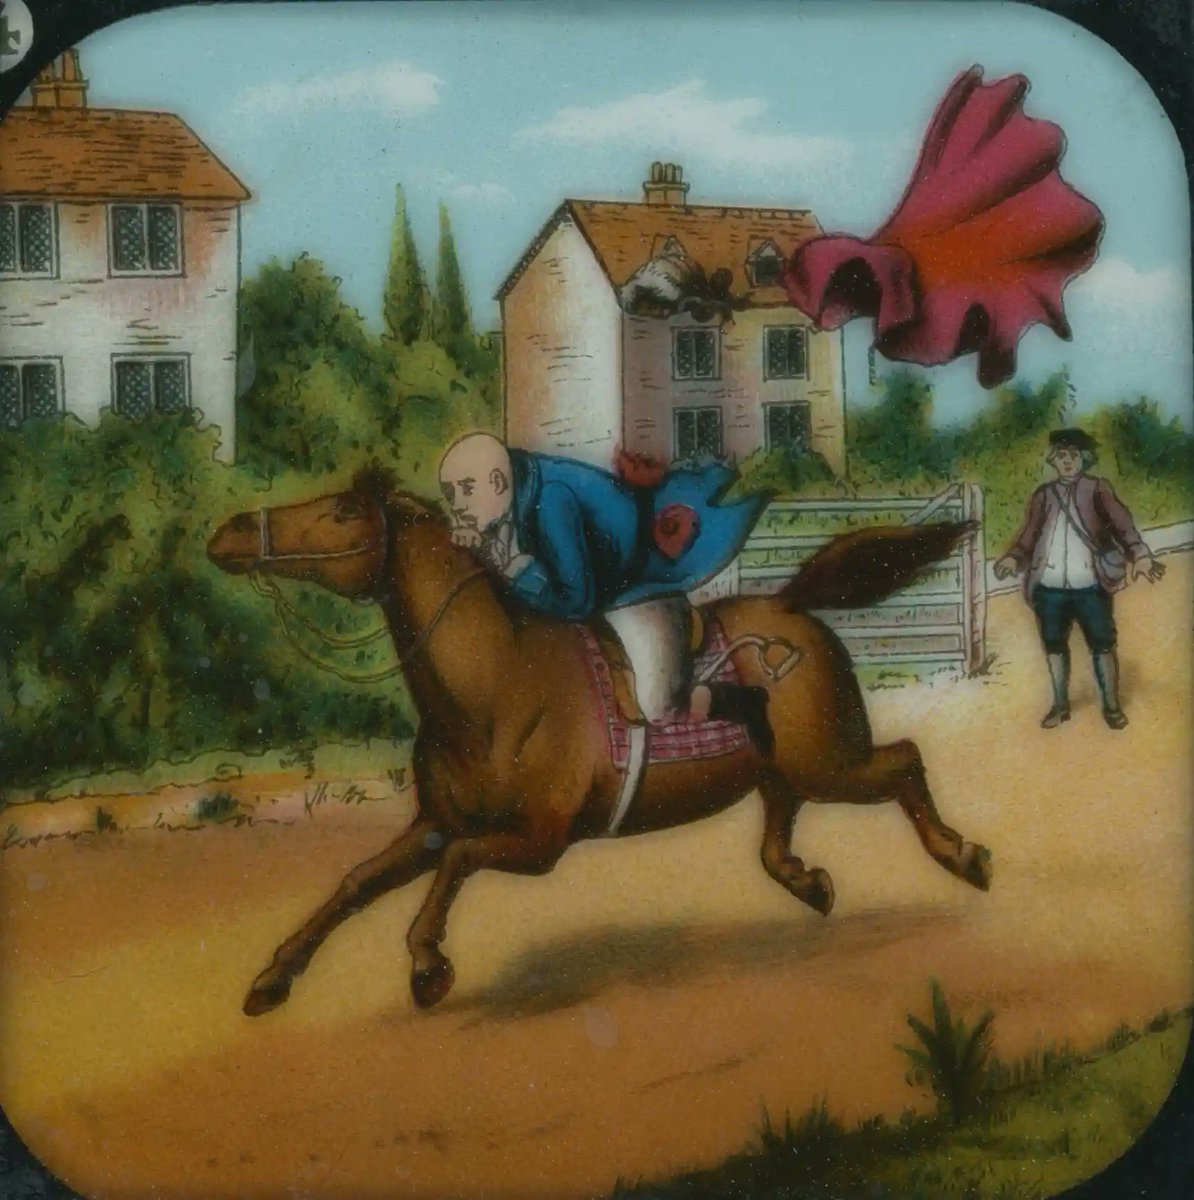 Last day of the stocktake! Here's a little surprise we found in a box of #Huyton lantern slides we were cleaning: from Cowper's 'Diverting #History of John Gilpin', Gilpin hangs desperately onto his bolting #horse (Primus series B) #EYADustbusters #poems #culture #archives #story